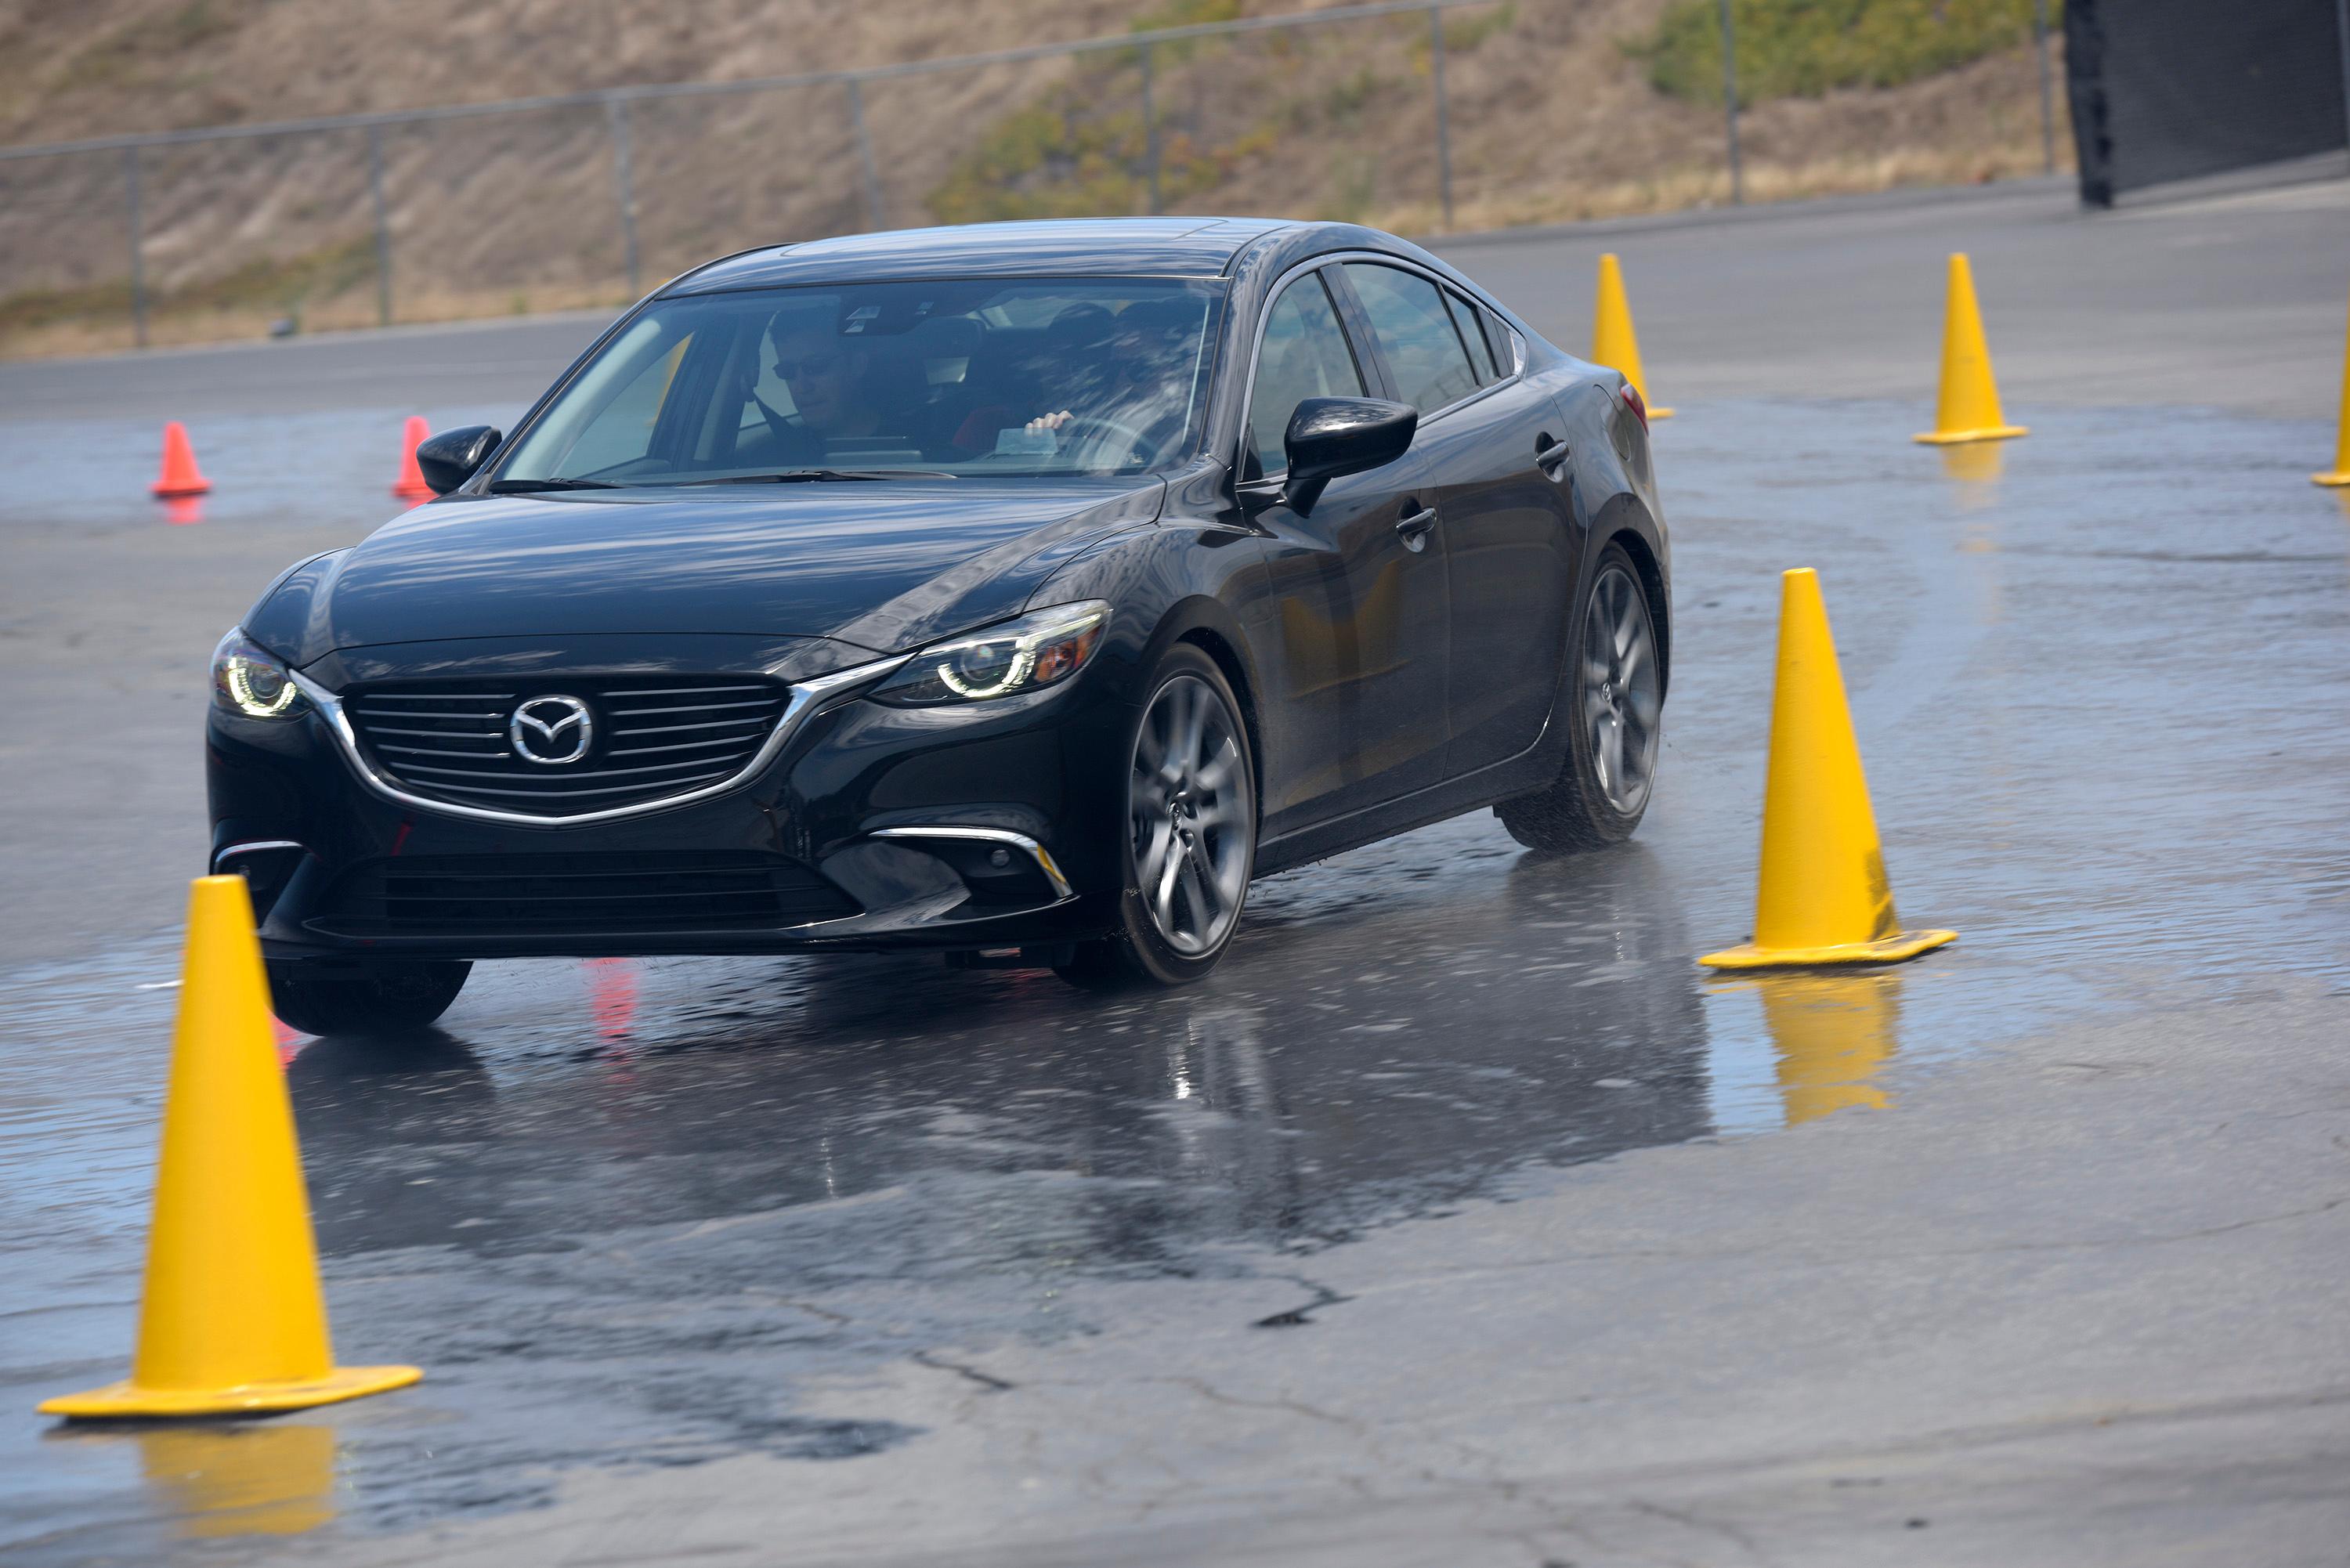 Mazda’s driving assistance technology is a little behind the rest of the industry.